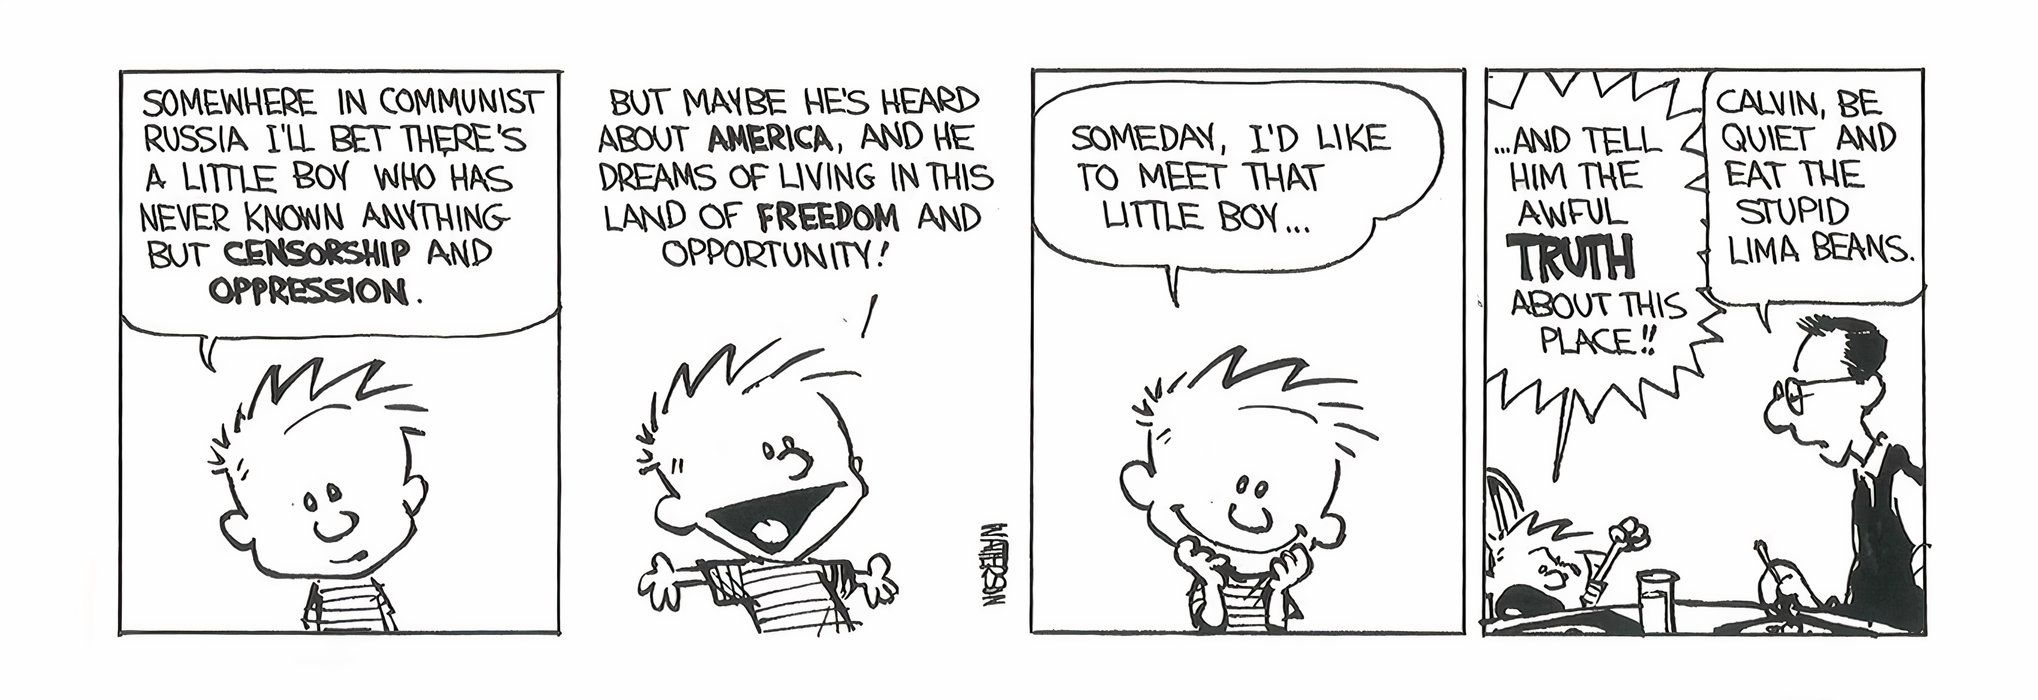 In a Calvin and Hobbes strip, Calvin reveals the awful truth about being forced to eat lima beans.